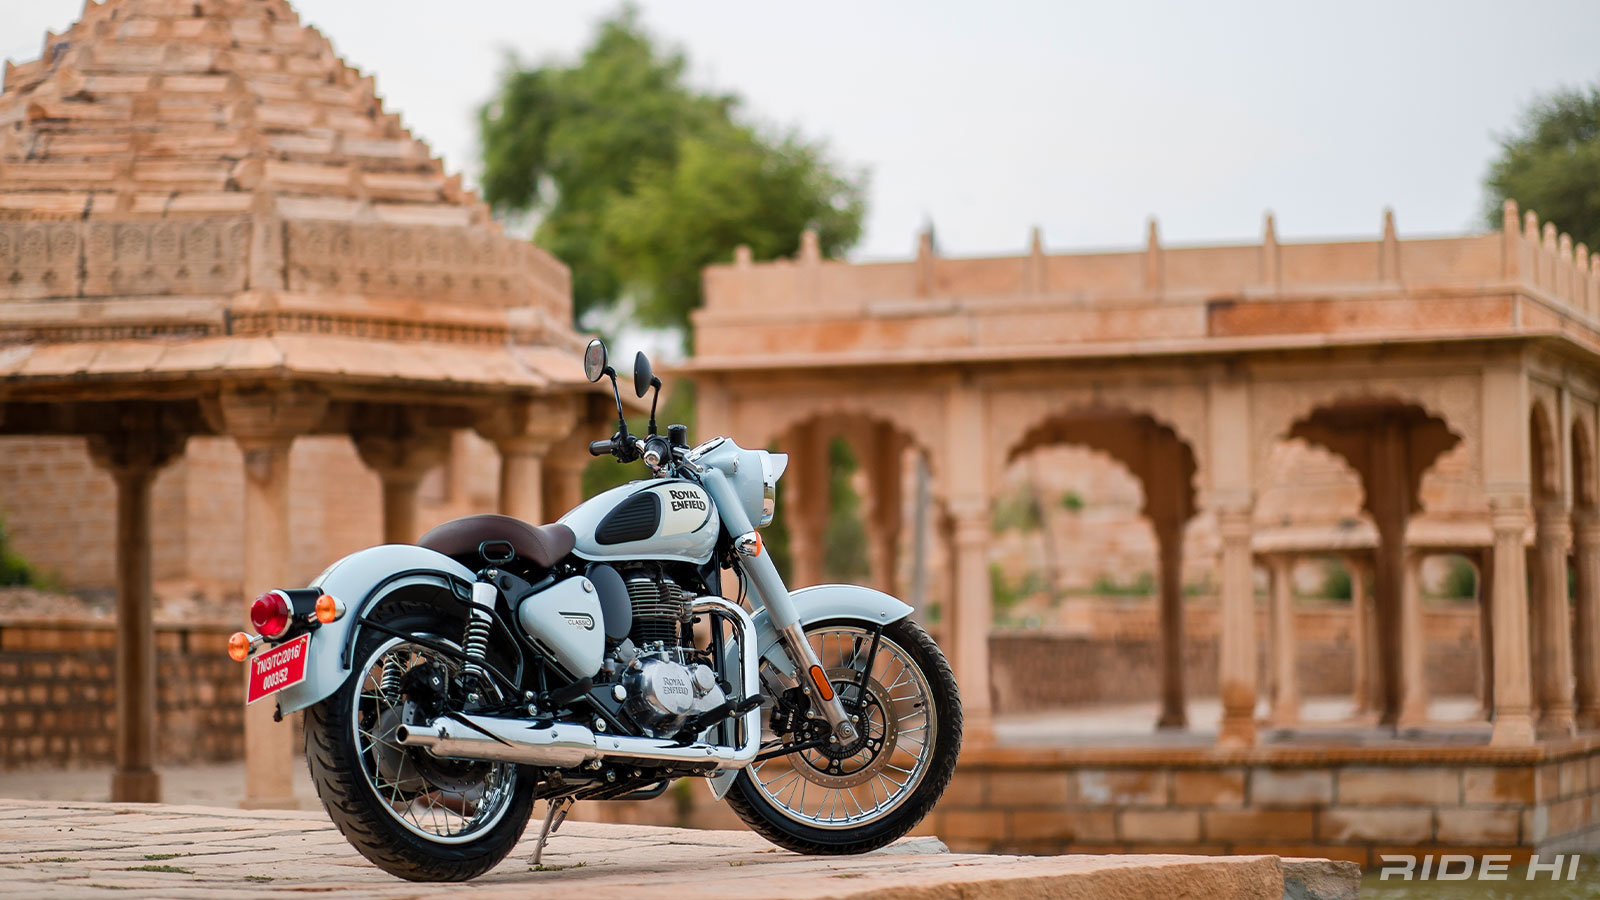 royalenfield_classic350_220210_13